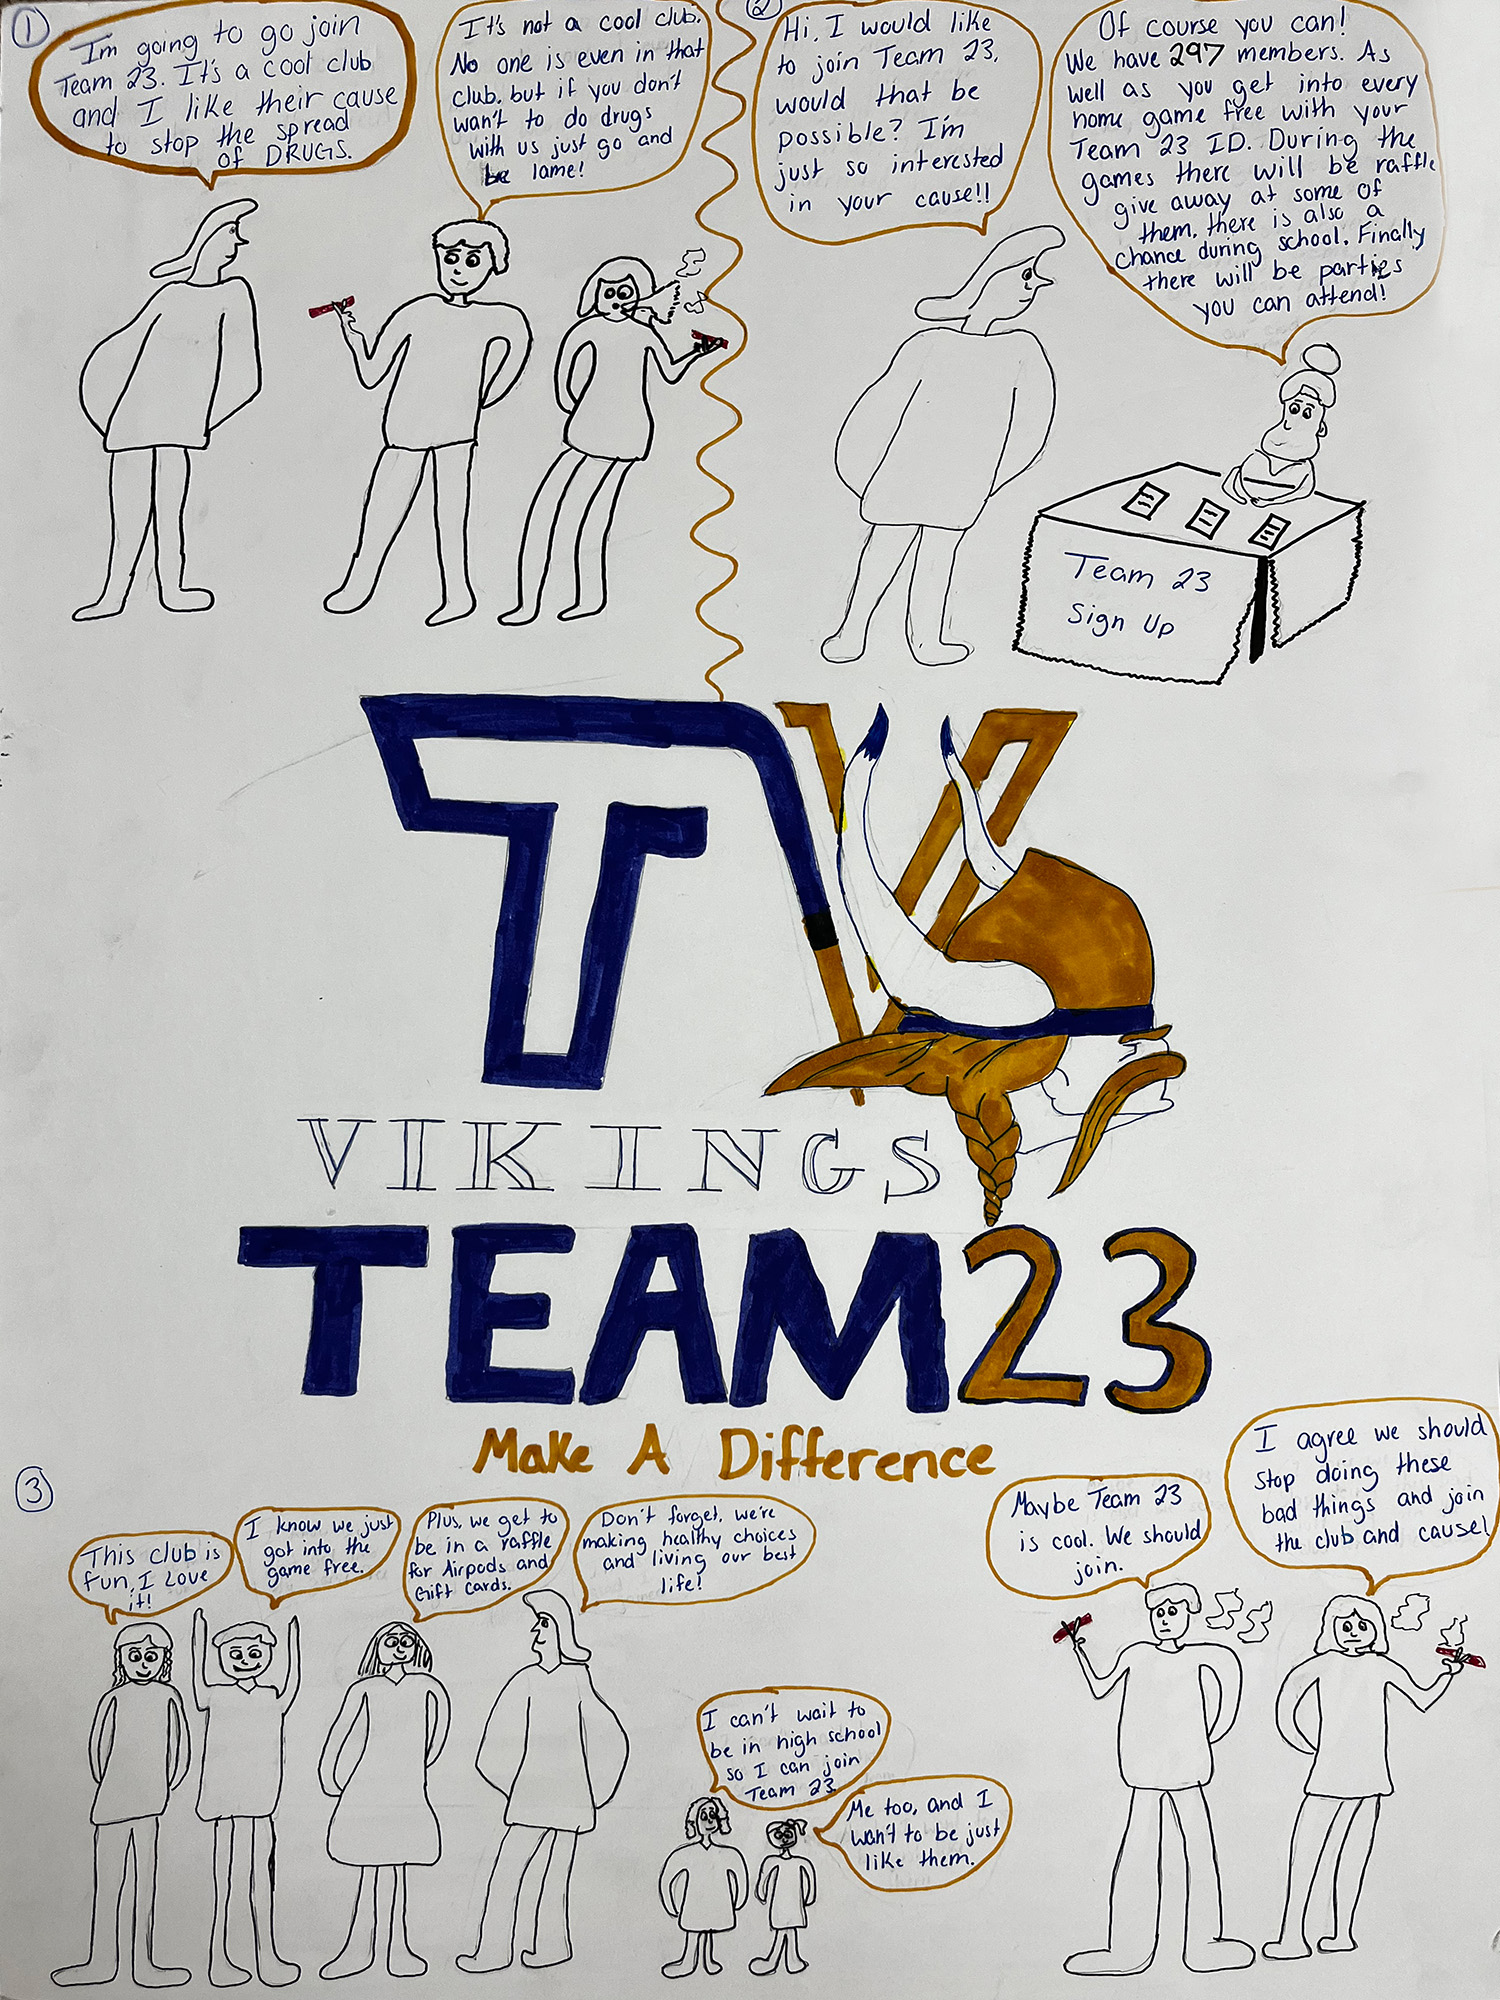 Teays Valley Vikings - Make a difference cartoon artwork